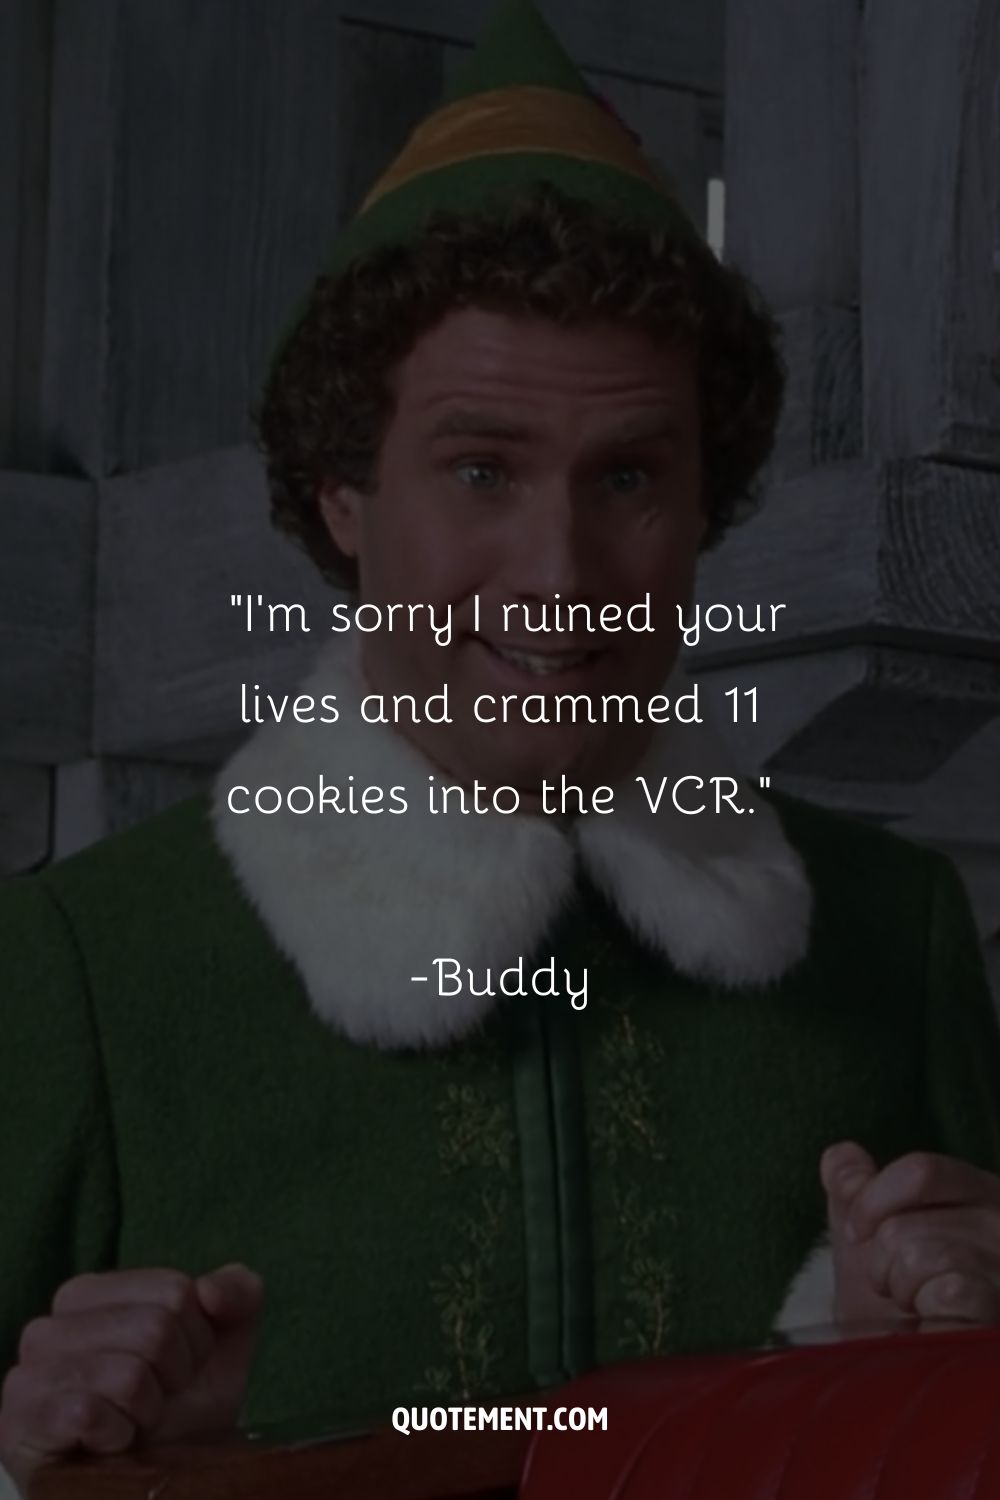 Buddy the Elf in his green costume.